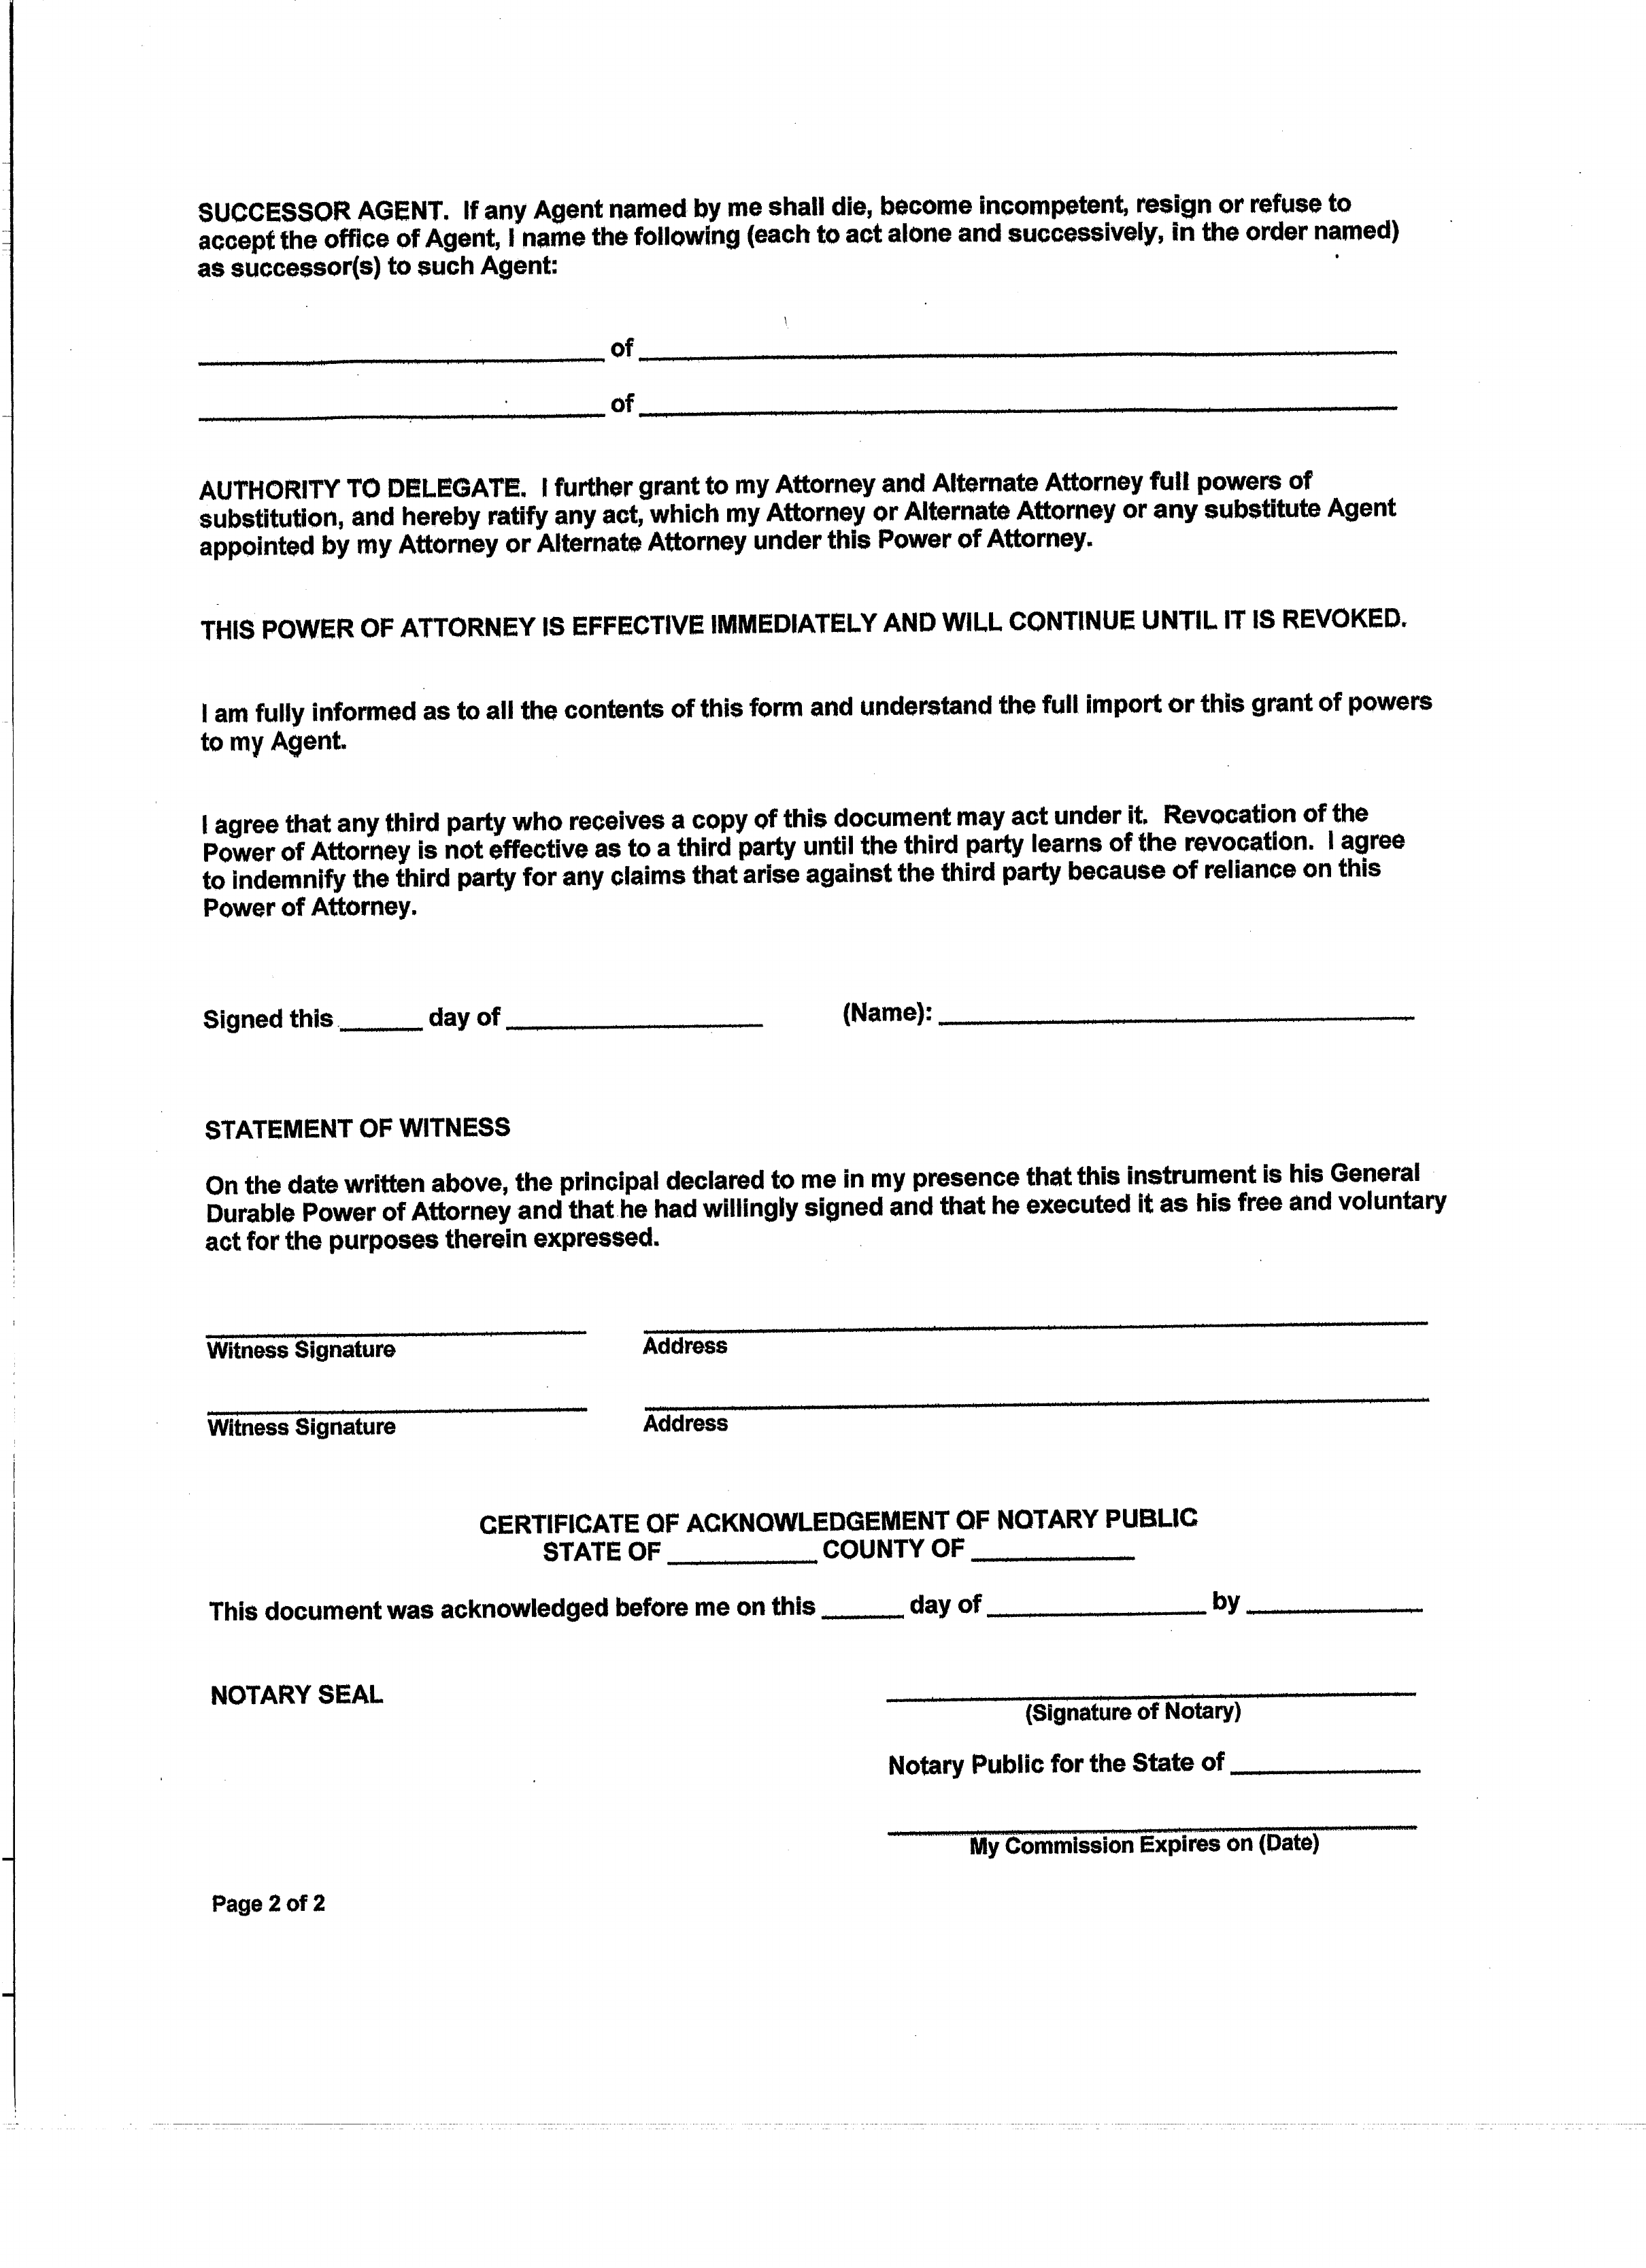 general-durable-power-of-attorney-georgia-edit-fill-sign-online-handypdf